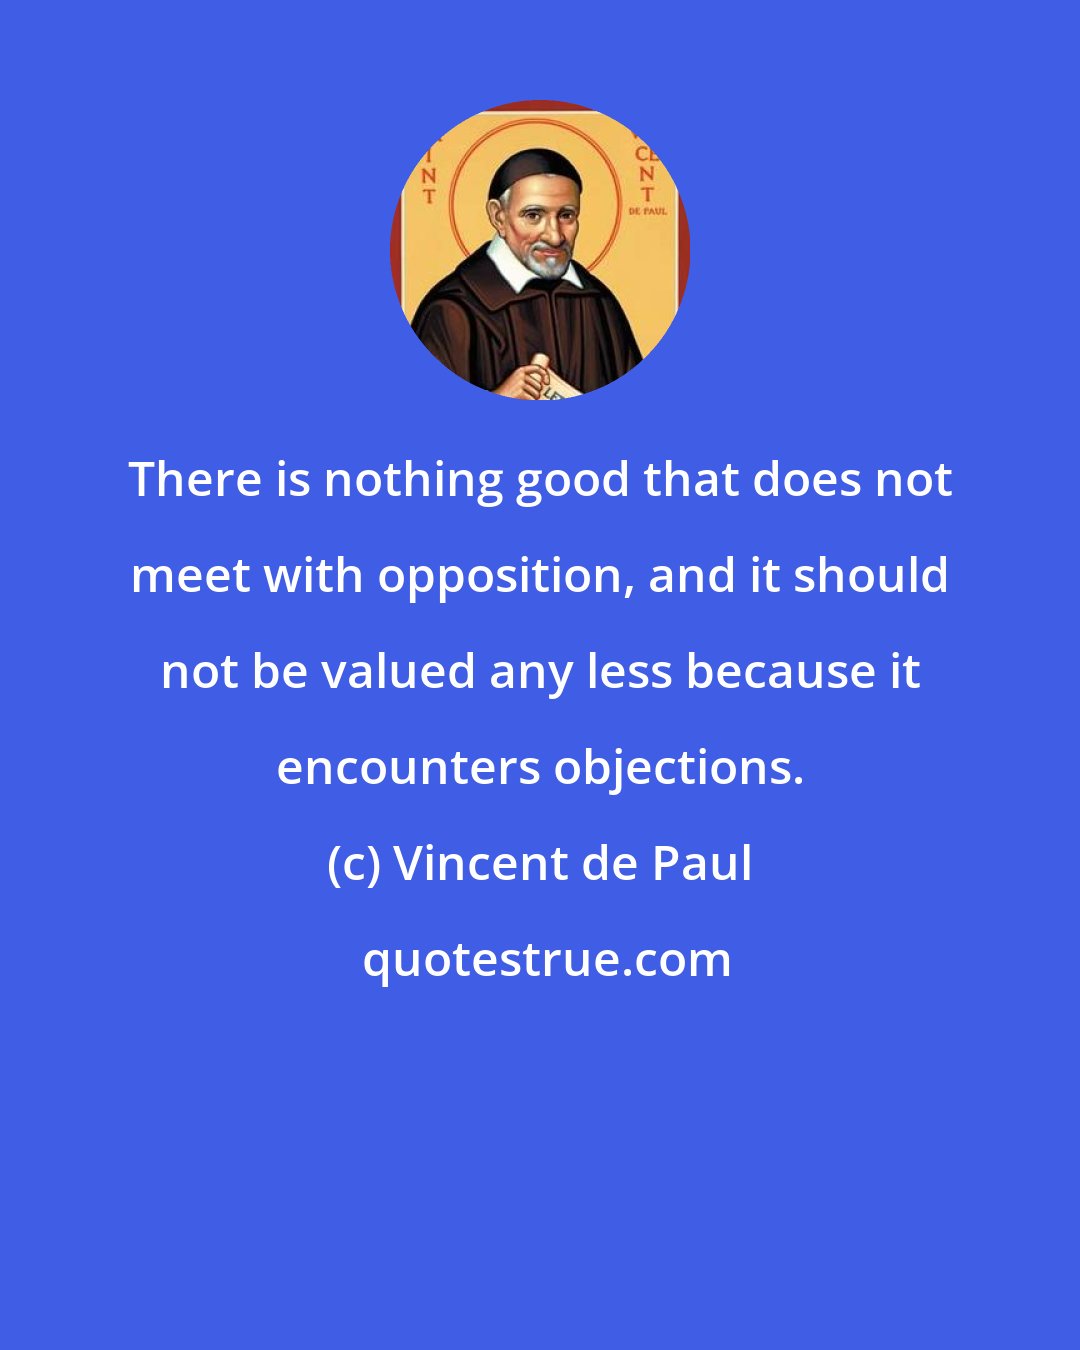 Vincent de Paul: There is nothing good that does not meet with opposition, and it should not be valued any less because it encounters objections.